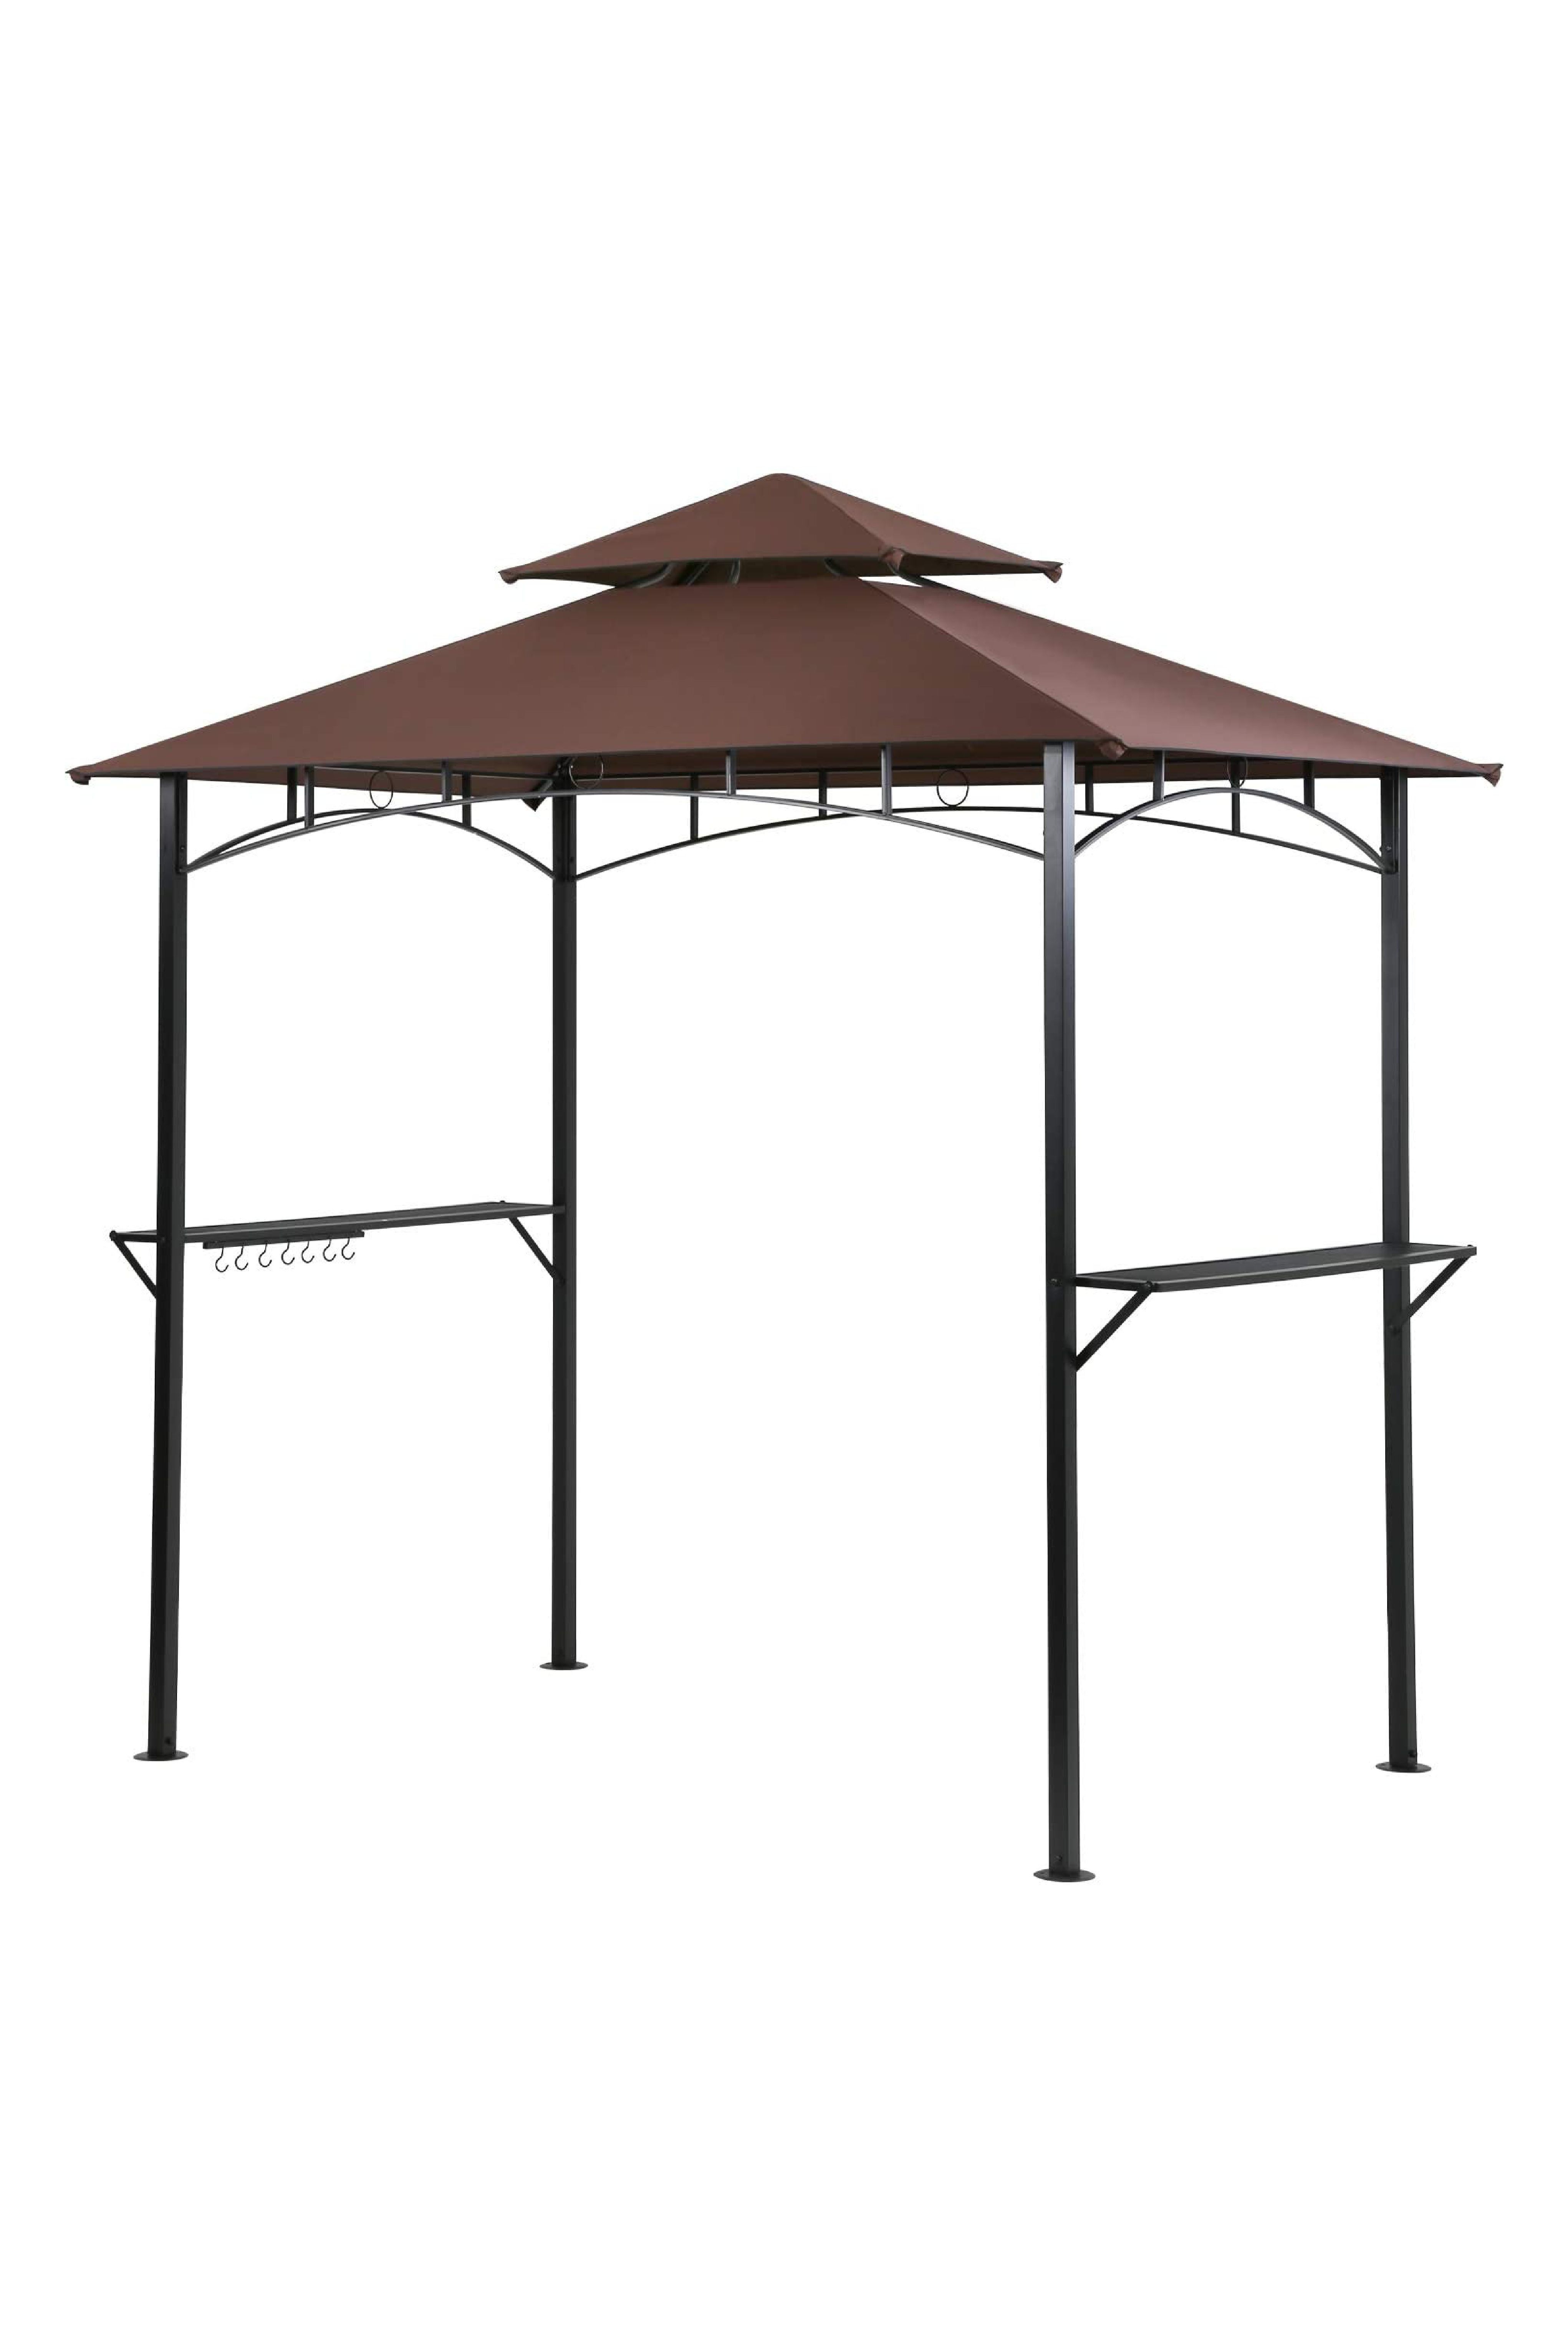 8 Best Grill Gazebos To Buy In 2021 Top Rated Grill Gazebos